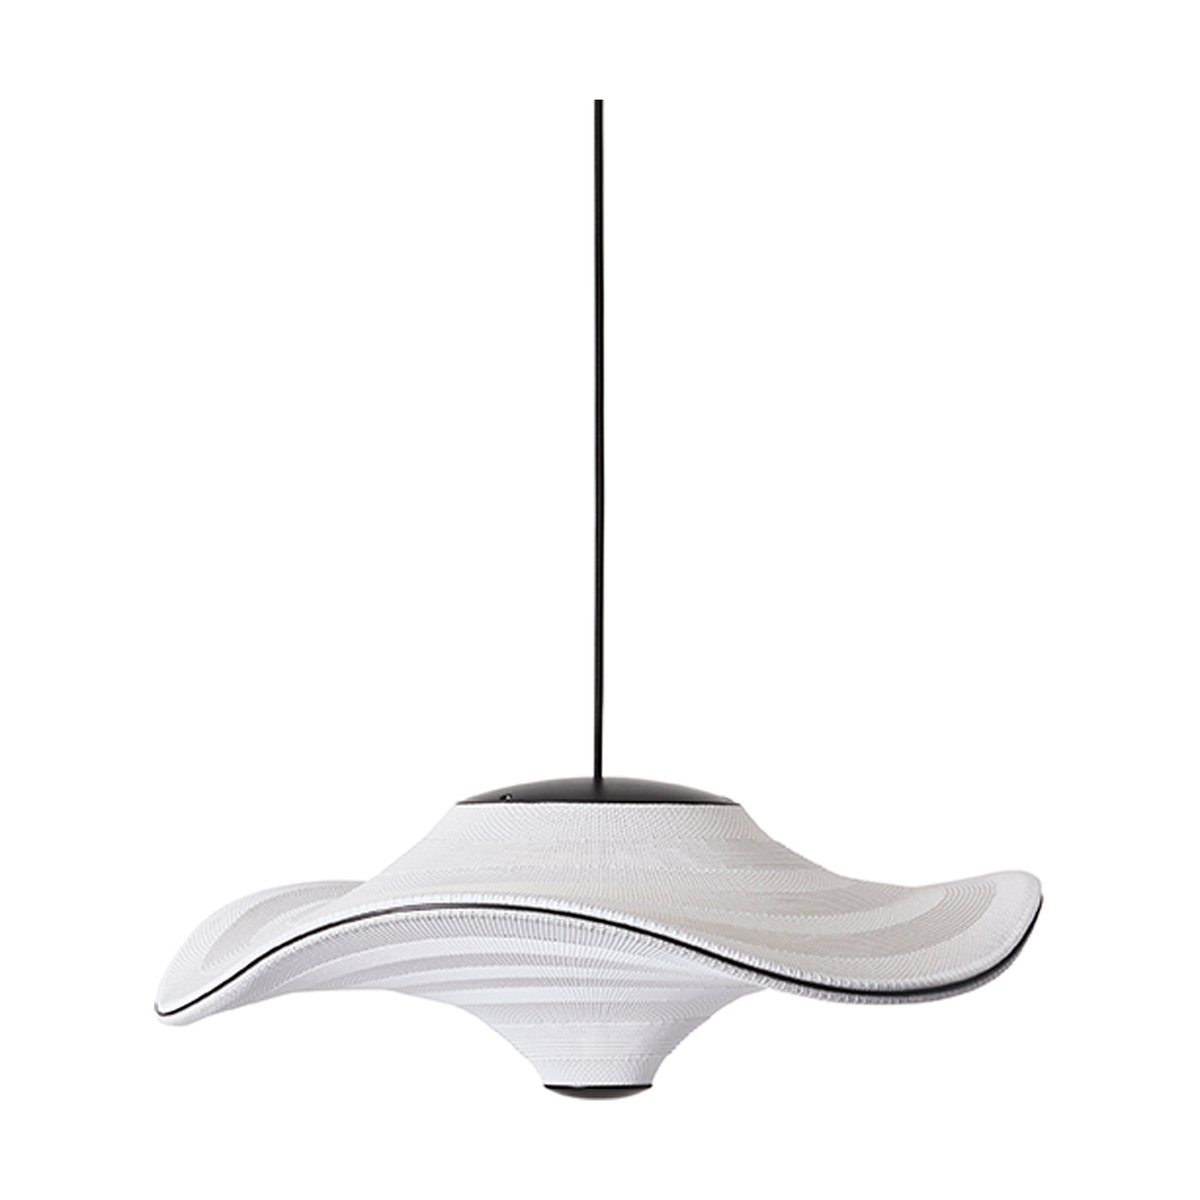 Made By Hand Flying hanglamp Ø78 cm Ivory white